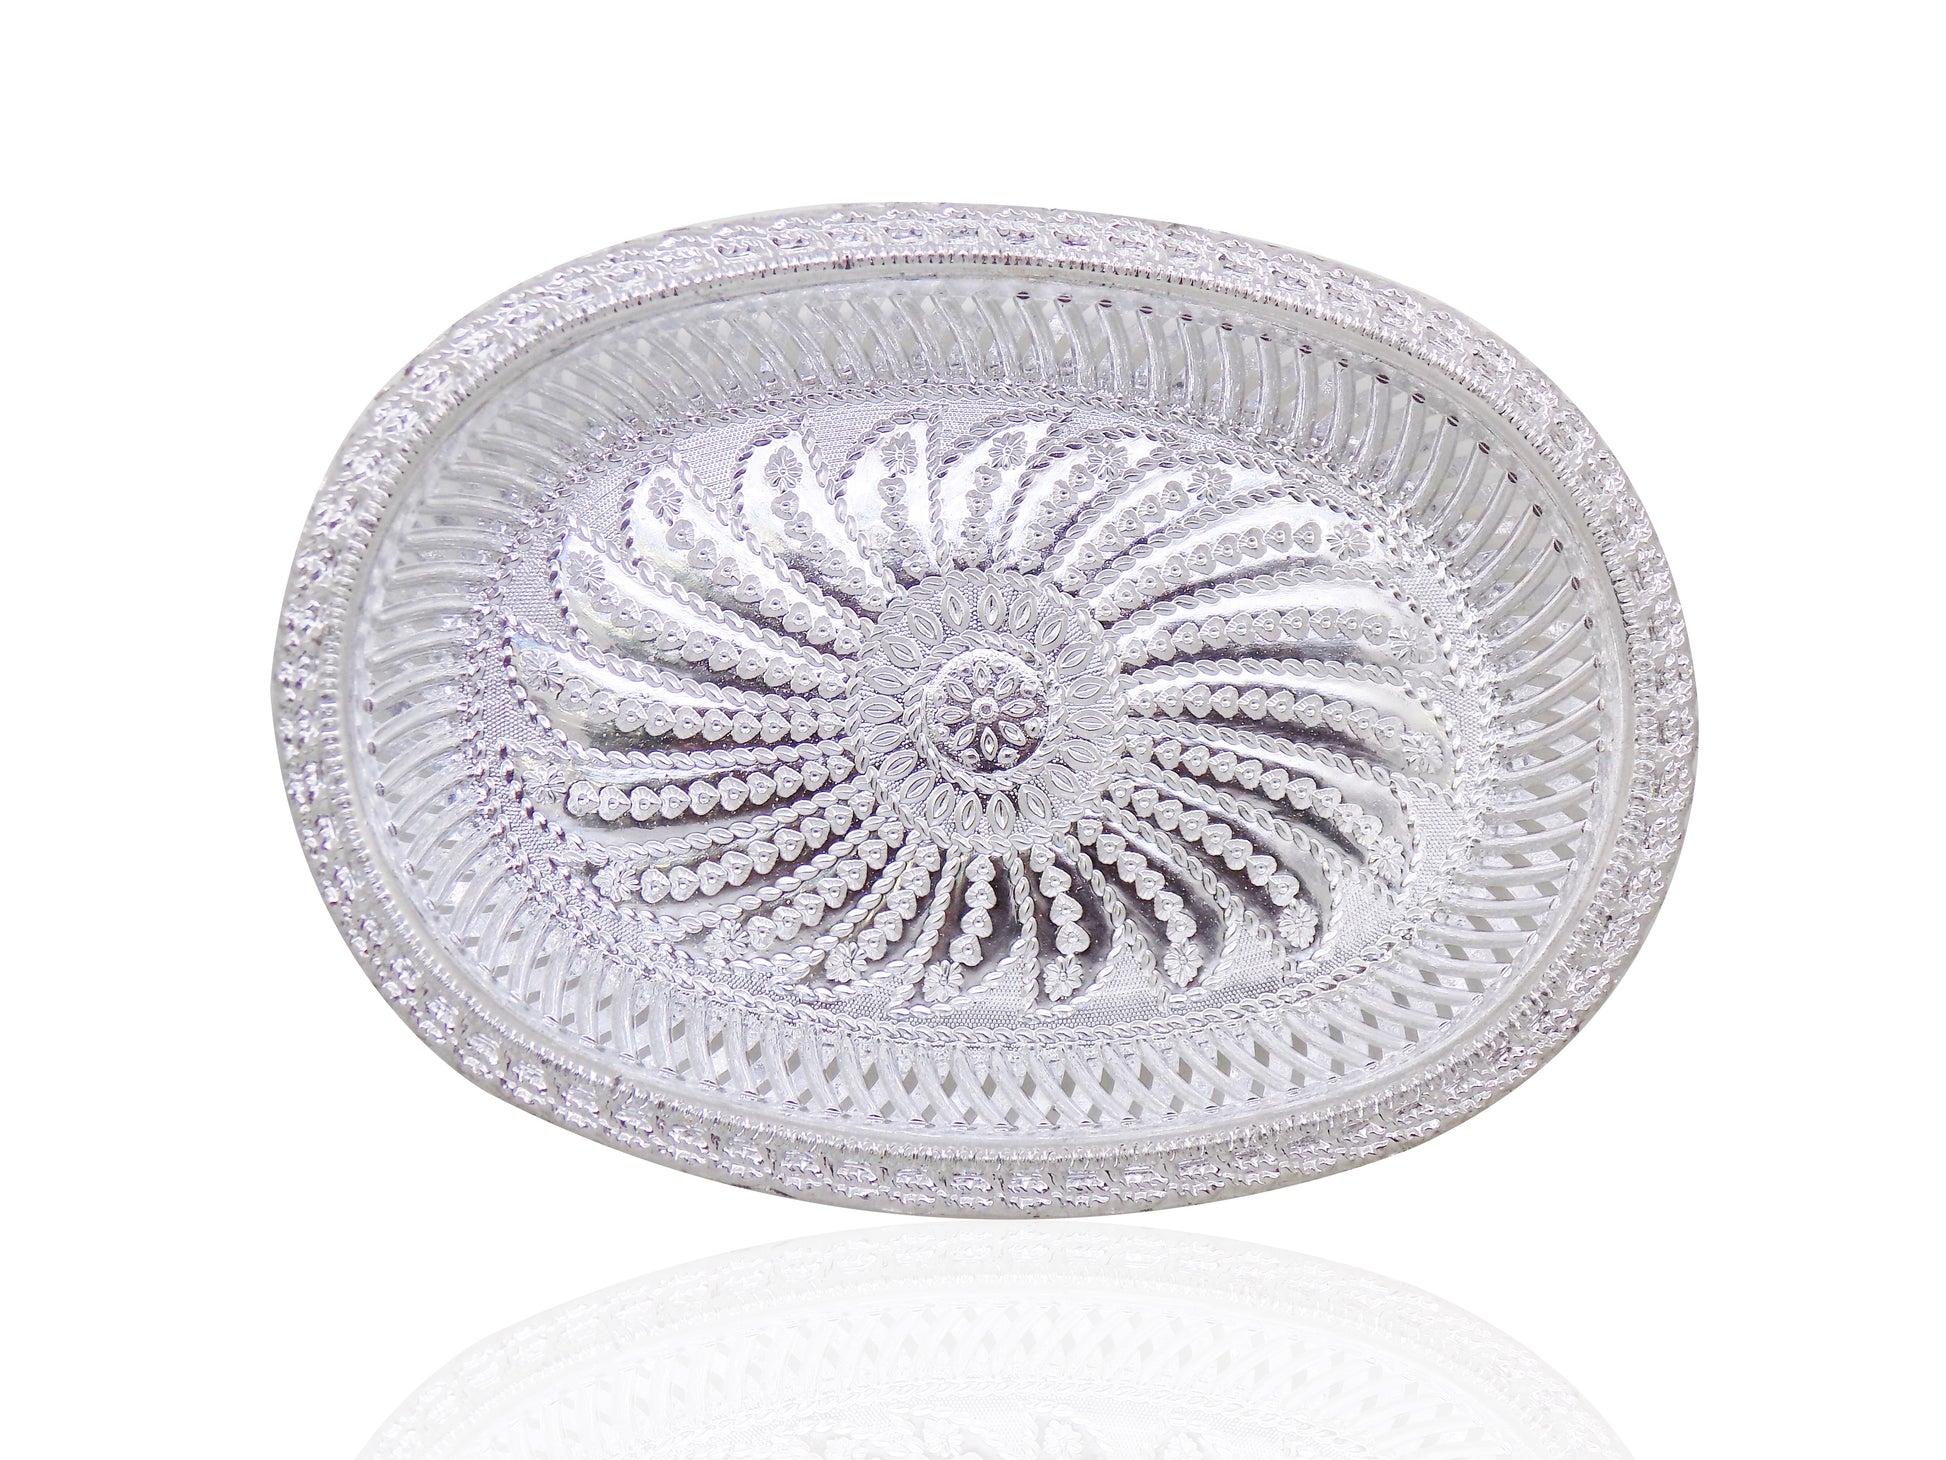 2090 Multipurpose Royal Design Oval Silver Gift Tray 